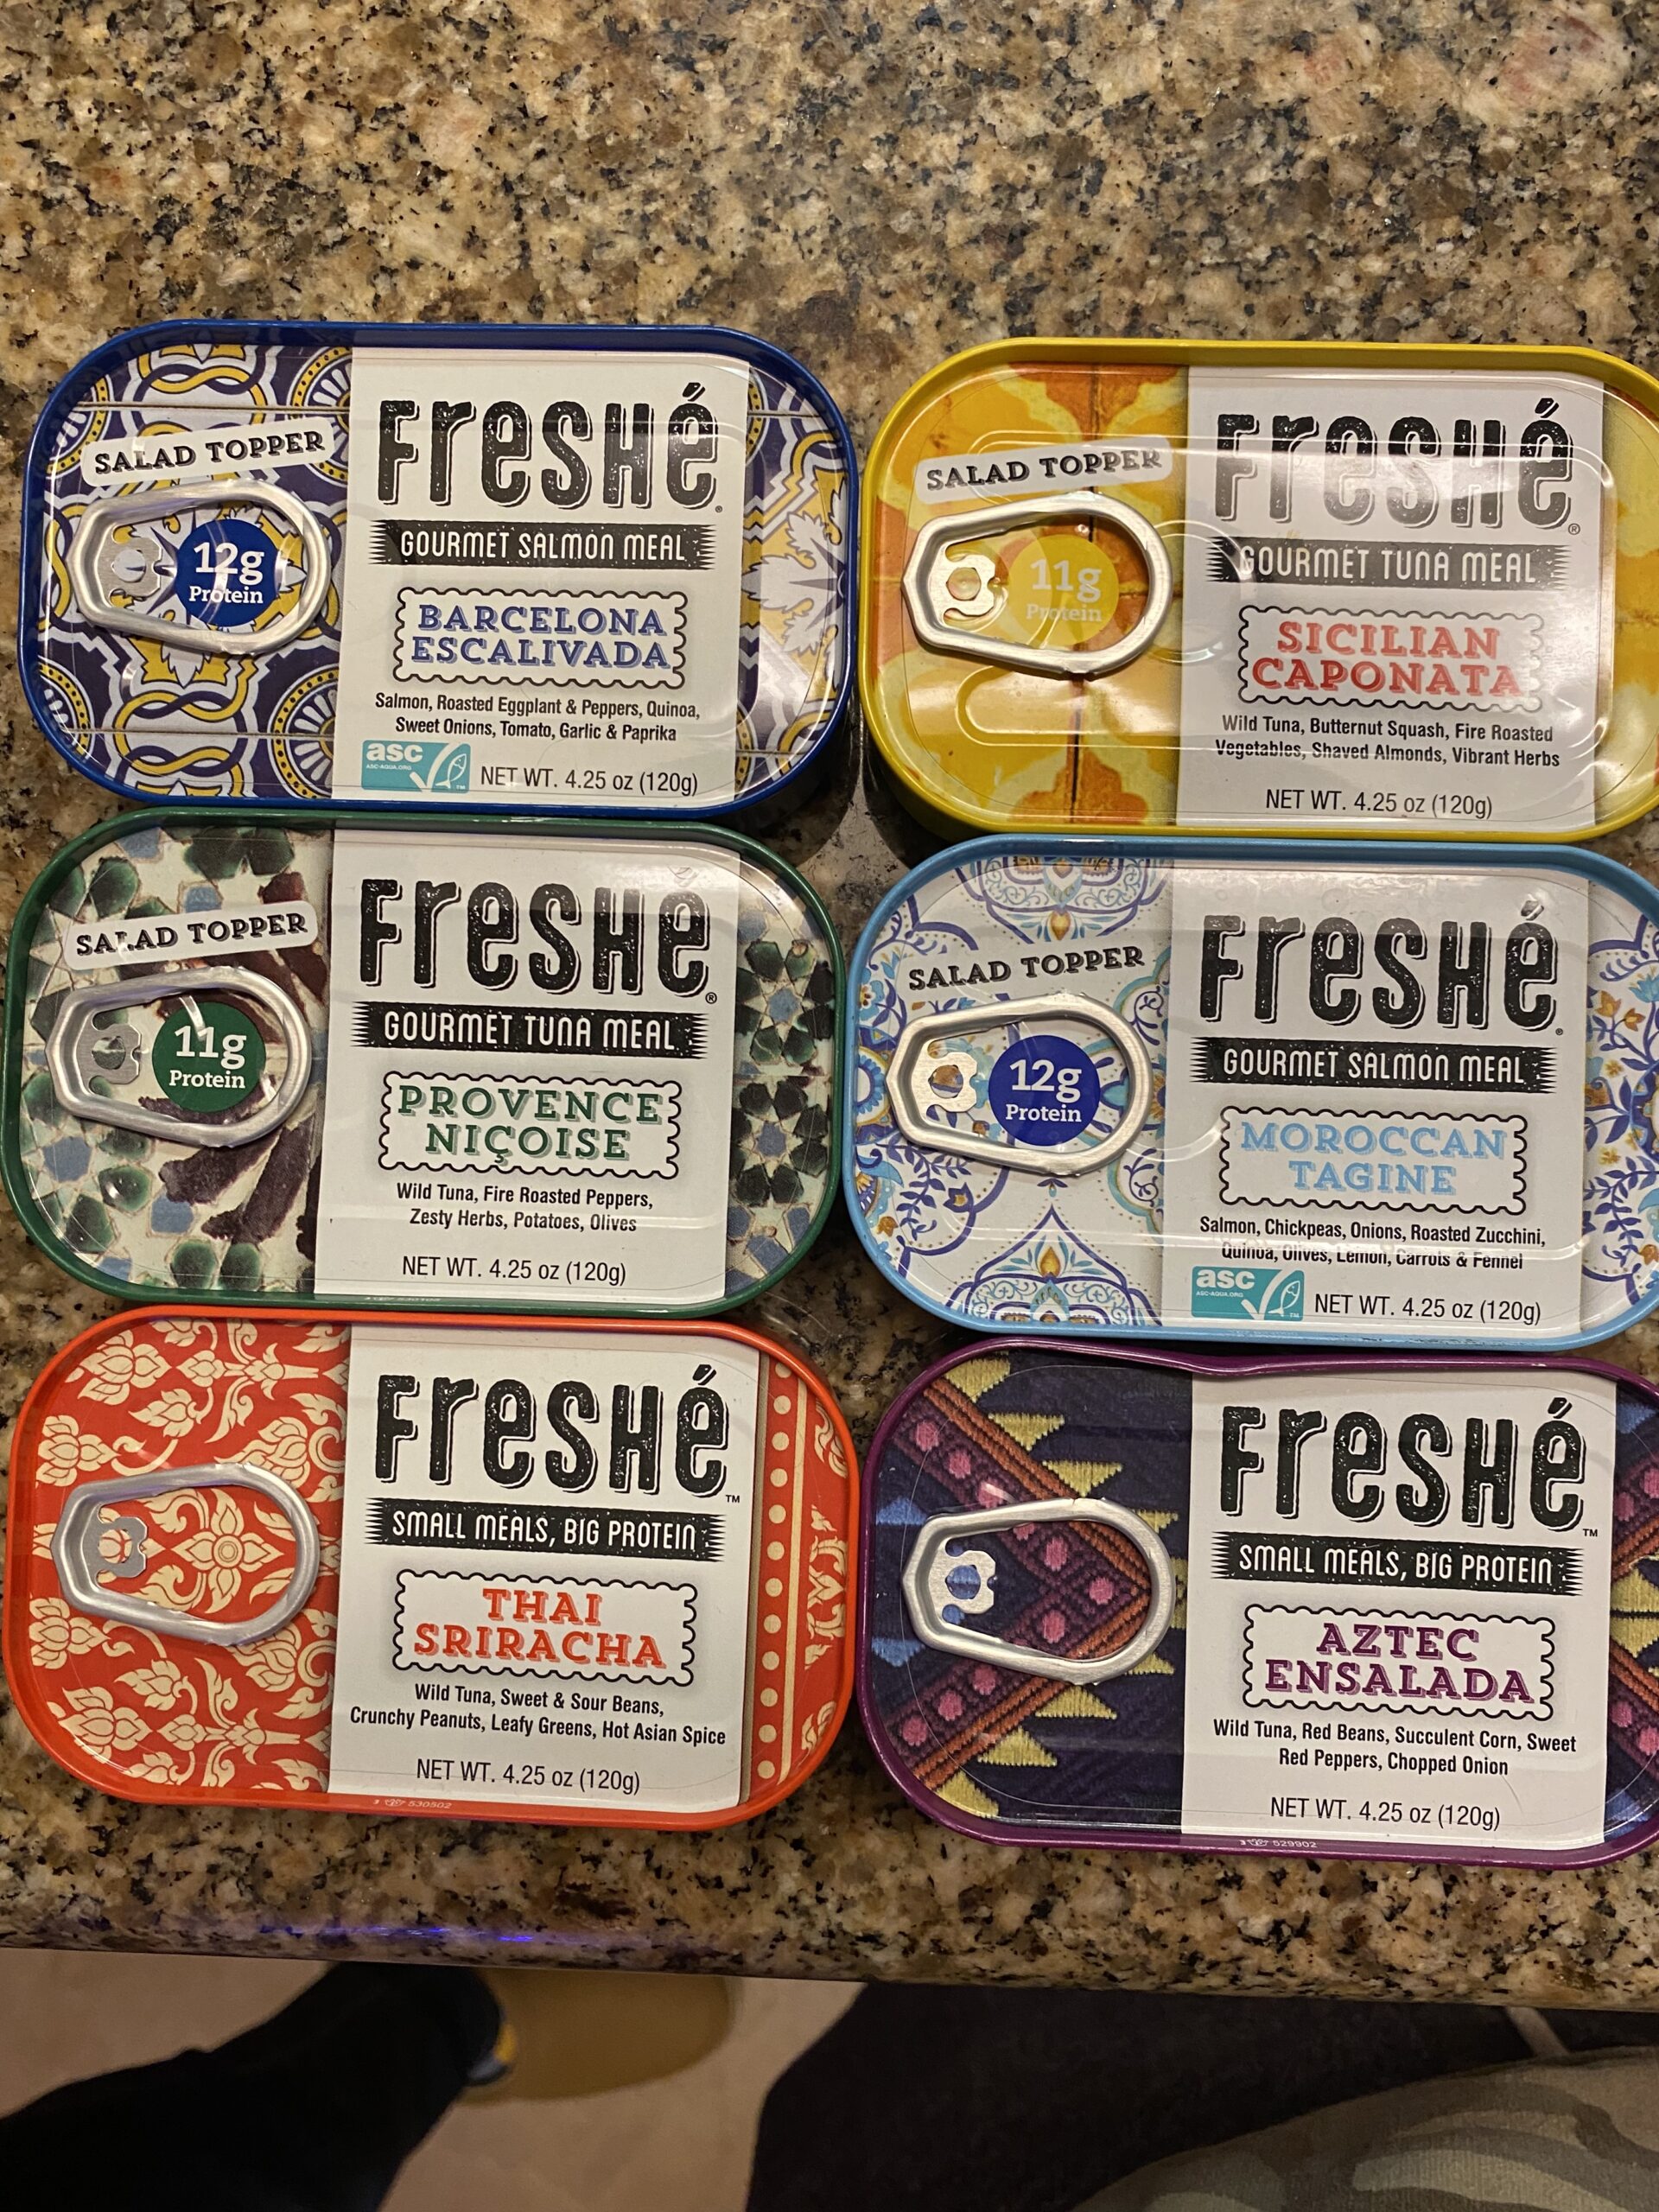 Freshe Gourmet Tuna, Salmon and protein meals